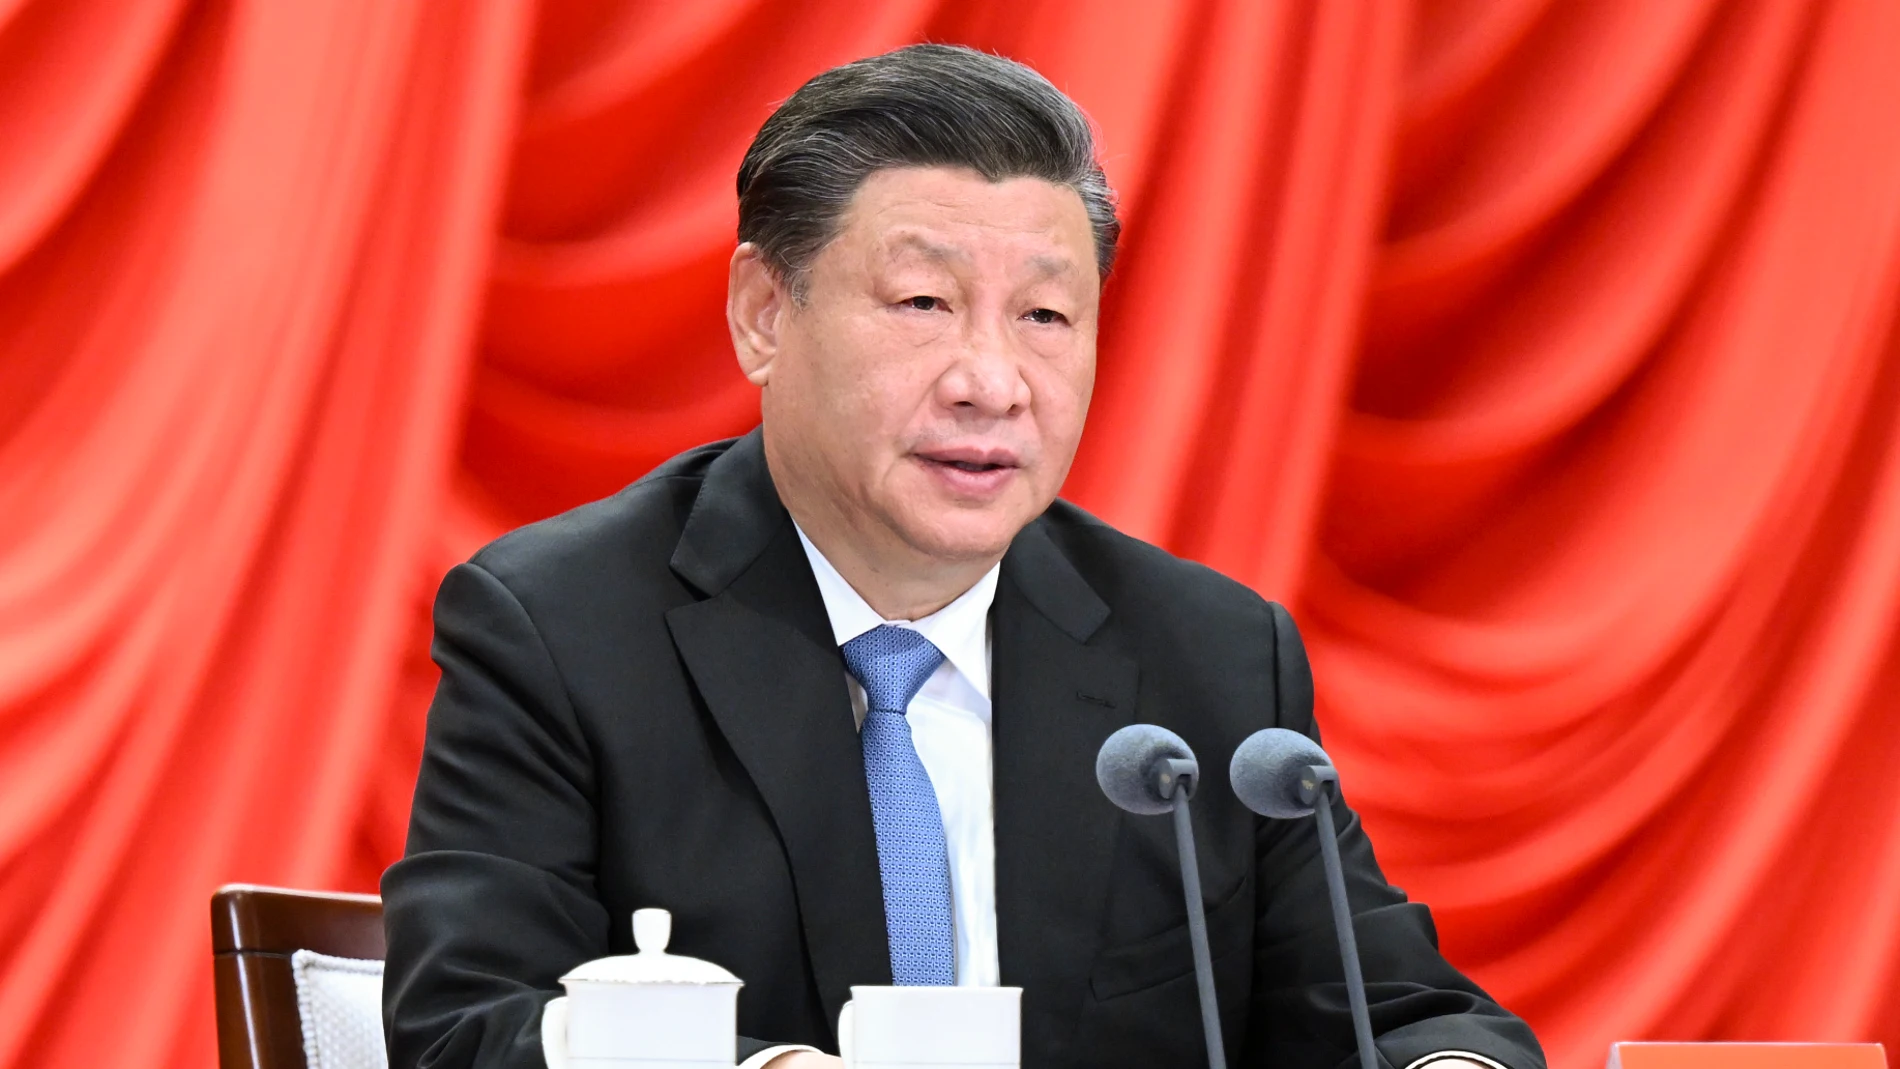 BEIJING, March 1, 2023 -- Xi Jinping, general secretary of the Communist Party of China (CPC) Central Committee, also Chinese president and chairman of the Central Military Commission, addresses a meeting marking the 90th anniversary of the Party School of the CPC Central Committee and the opening ceremony of its 2023 spring semester in Beijing, capital of China, March 1, 2023.01/03/2023